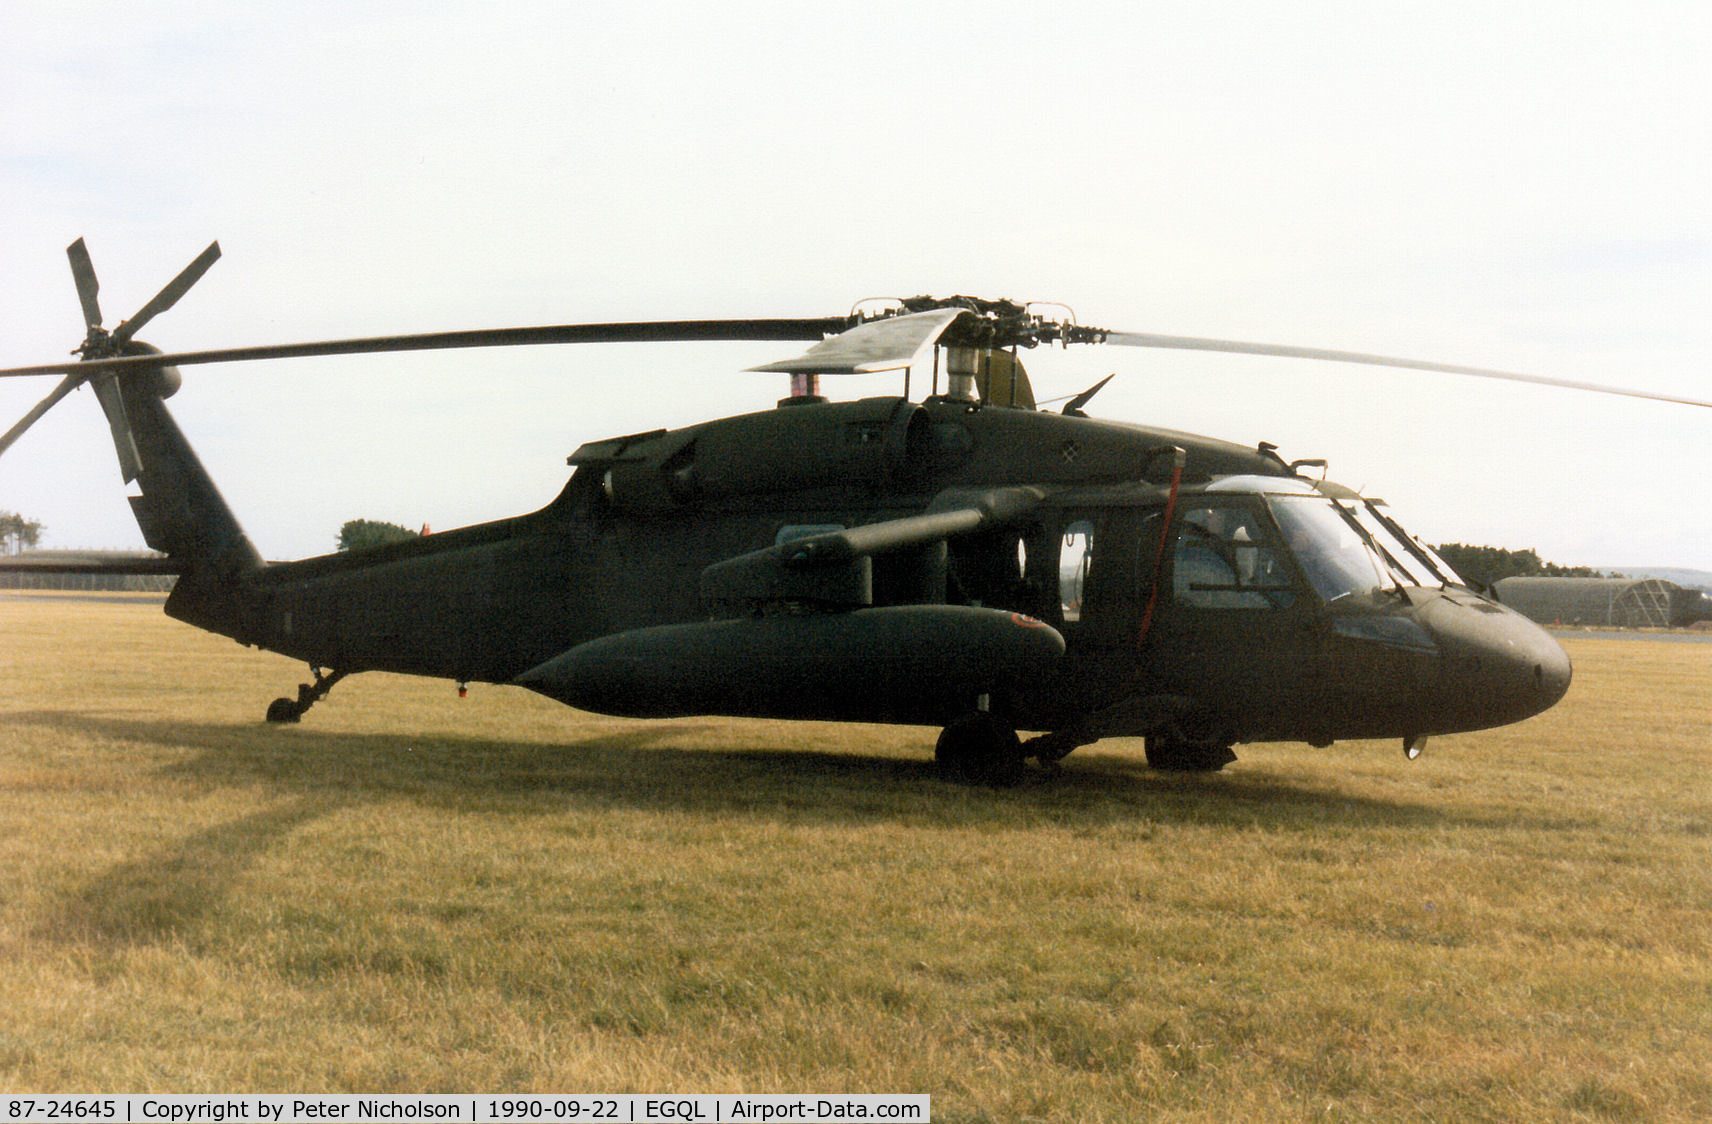 87-24645, 1987 Sikorsky UH-60A Black Hawk C/N 70-1184, UH-60A Black Hawk of the US Army's 2nd Armoured Cavalry Regiment based in Germany on display at the 1990 RAF Leuchars Airshow.